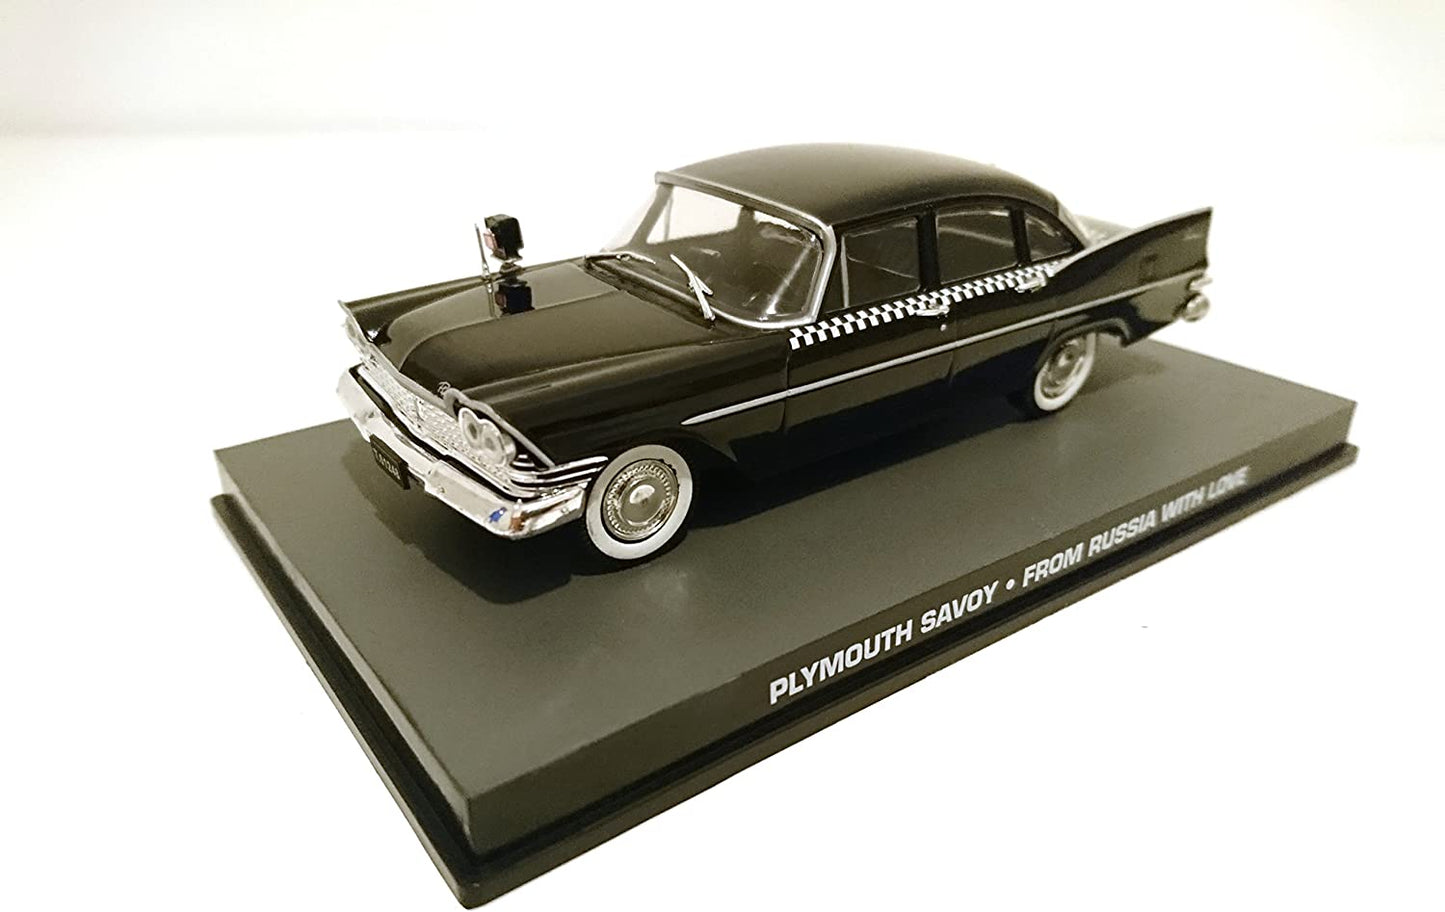 JB123 voiture 1/43 IXO 007 JAMES BOND Plymouth Savoy From Russia with Love